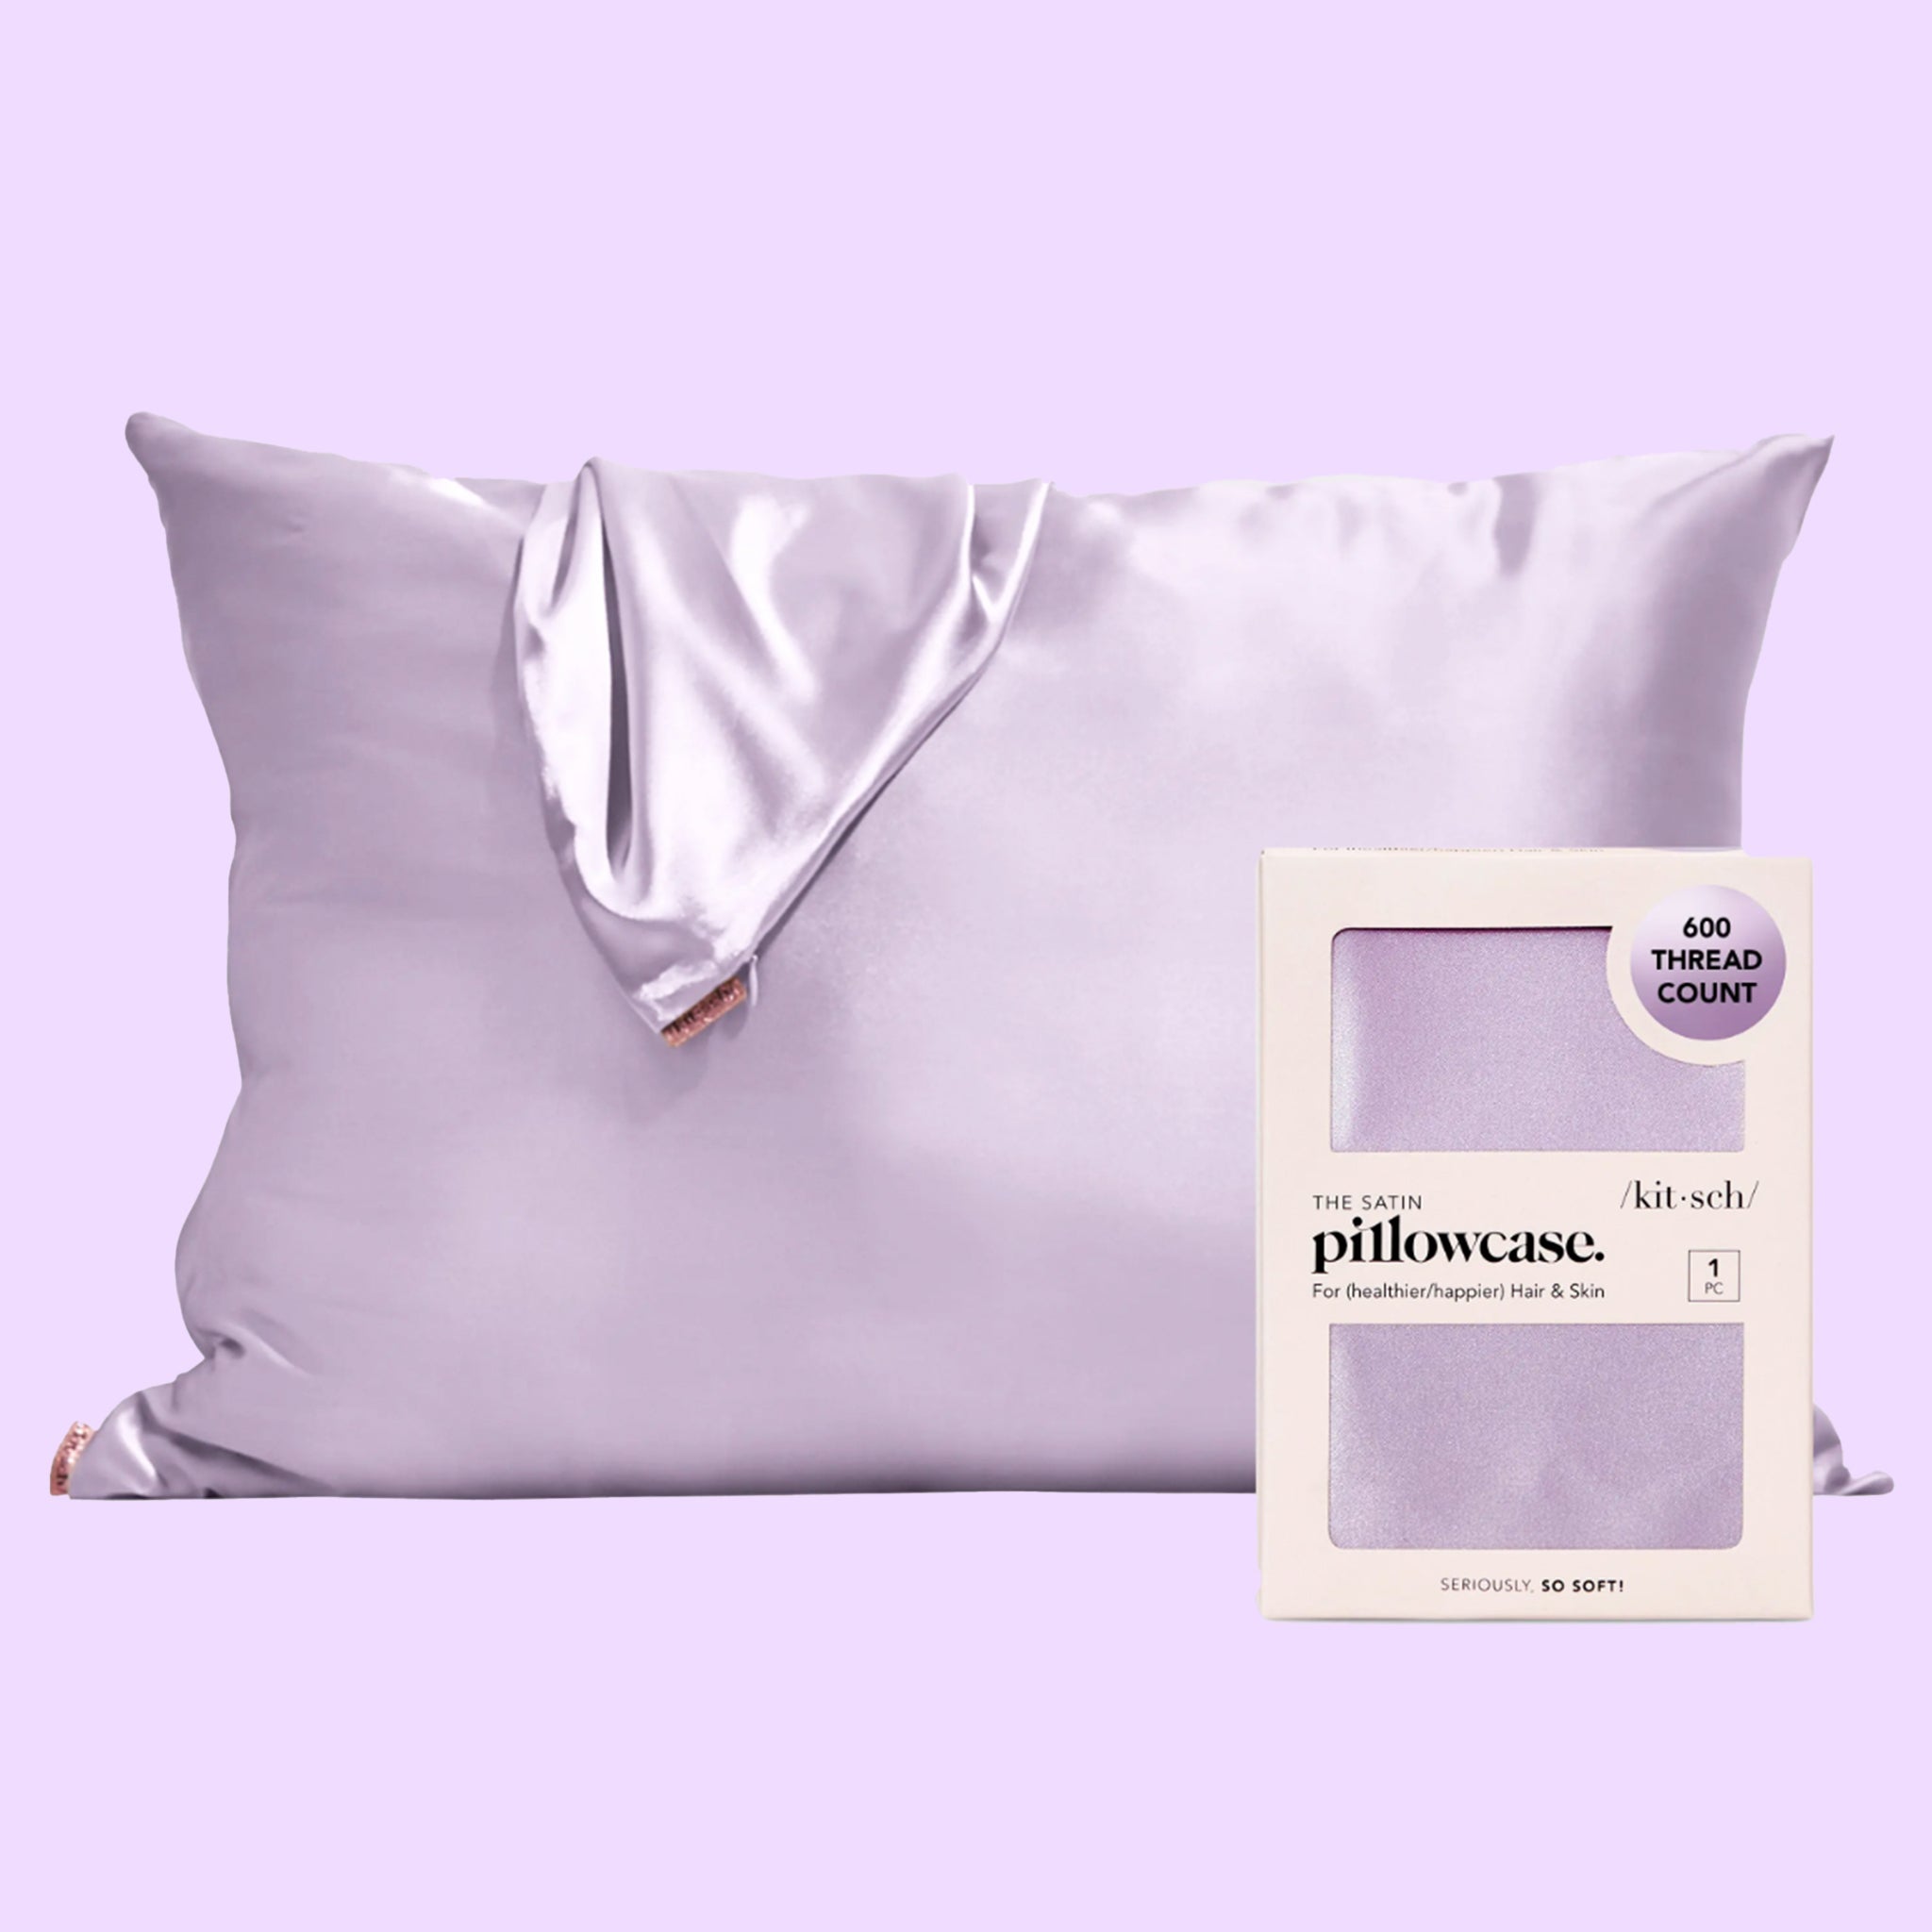 A purple satin pillowcase next to the packaging that it comes in. 